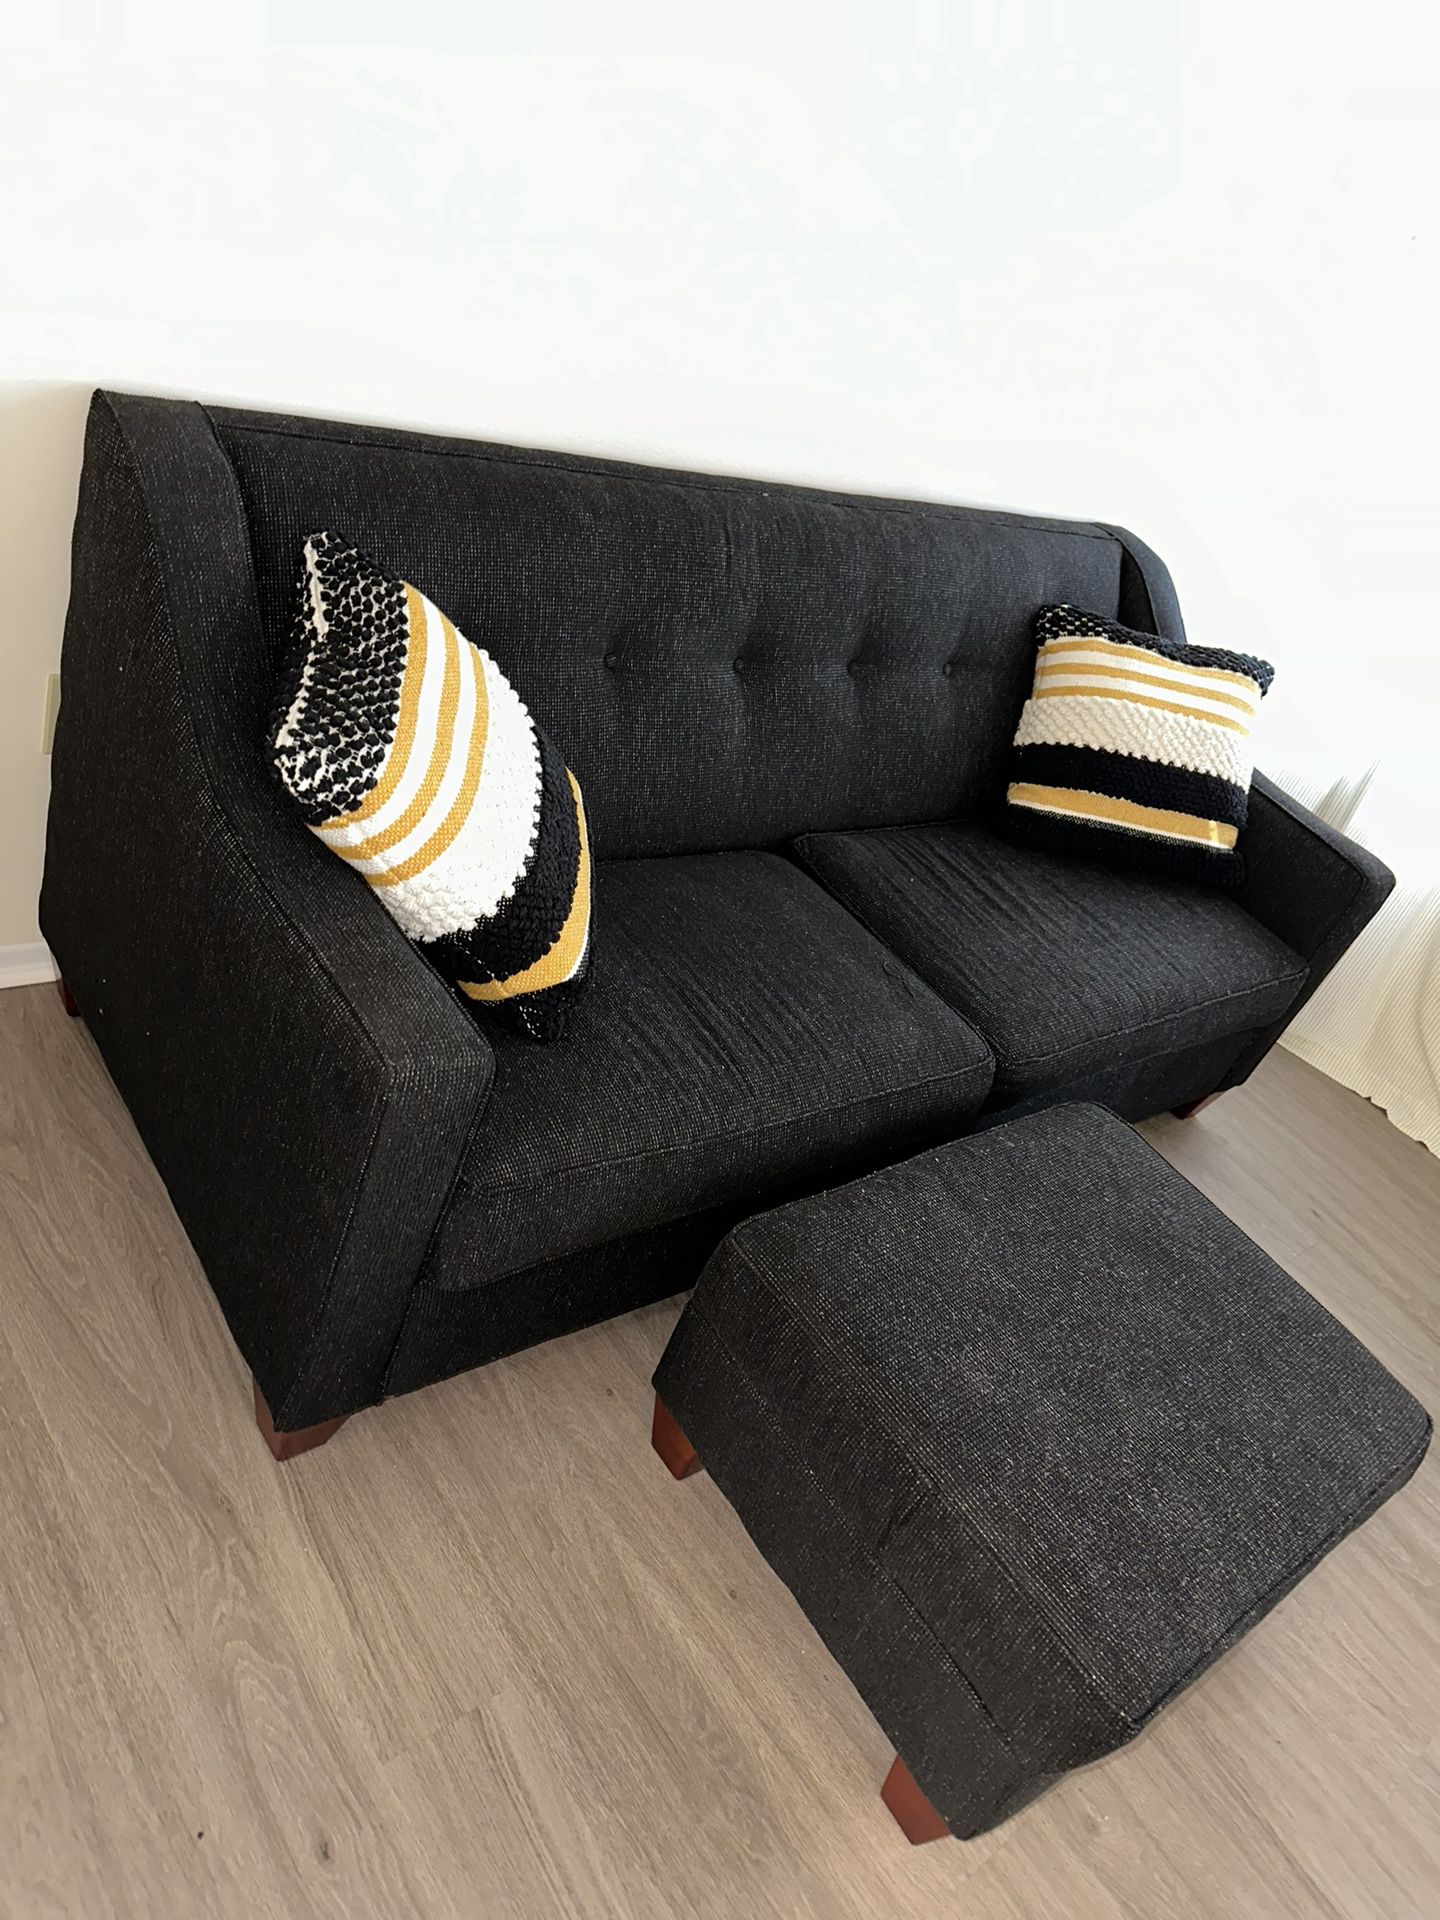 Black Couch With Ottoman - Pillows Are Free